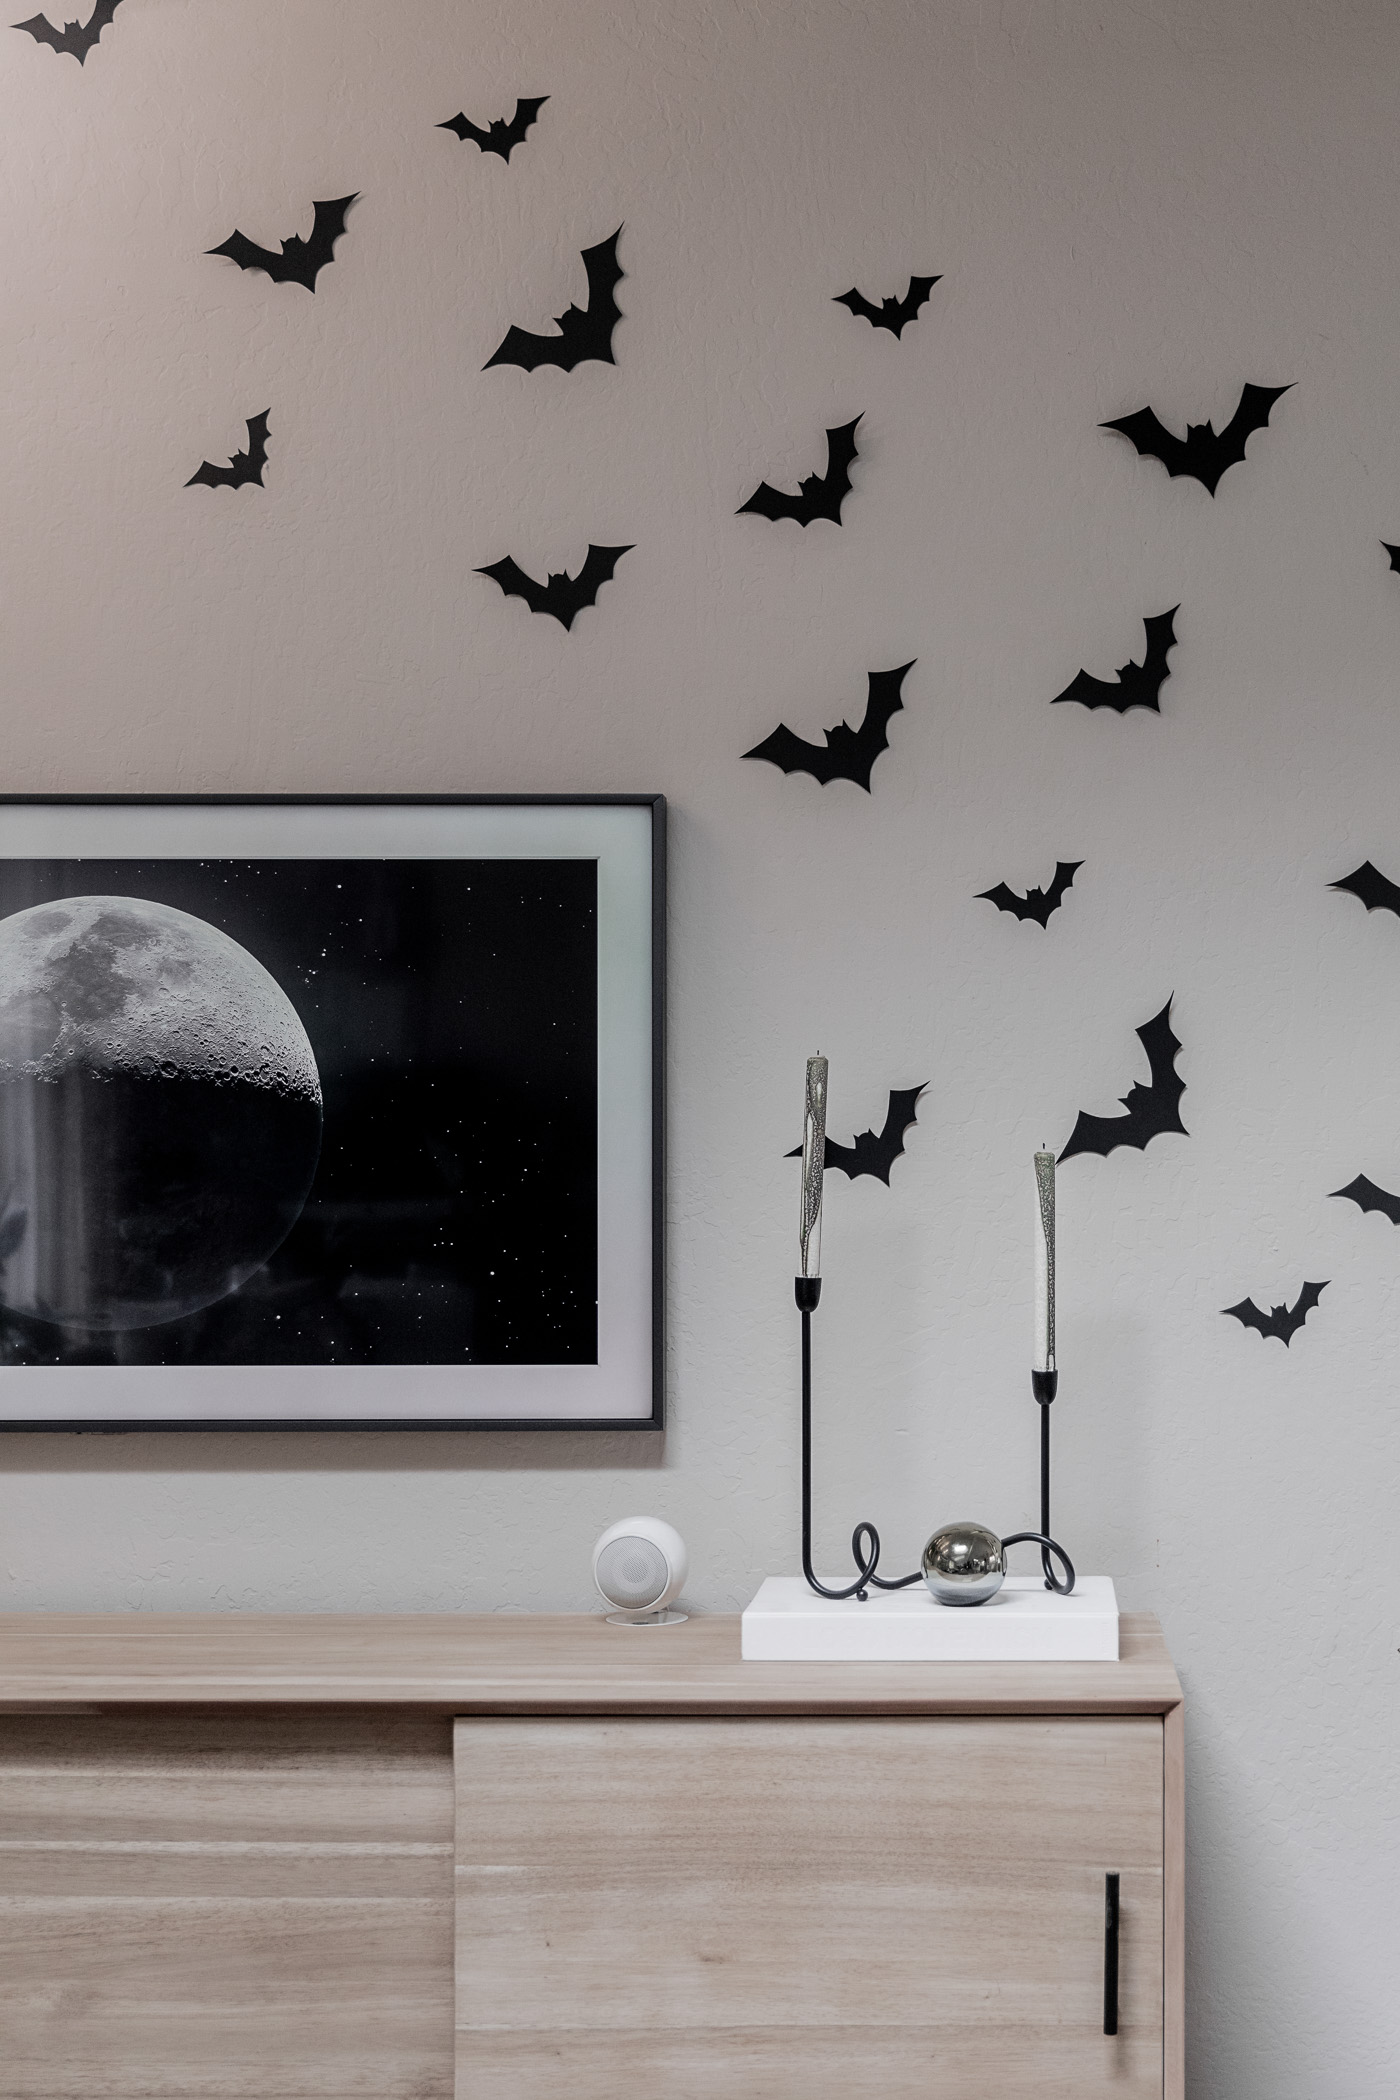 Spooky Decor That Works Year-Round